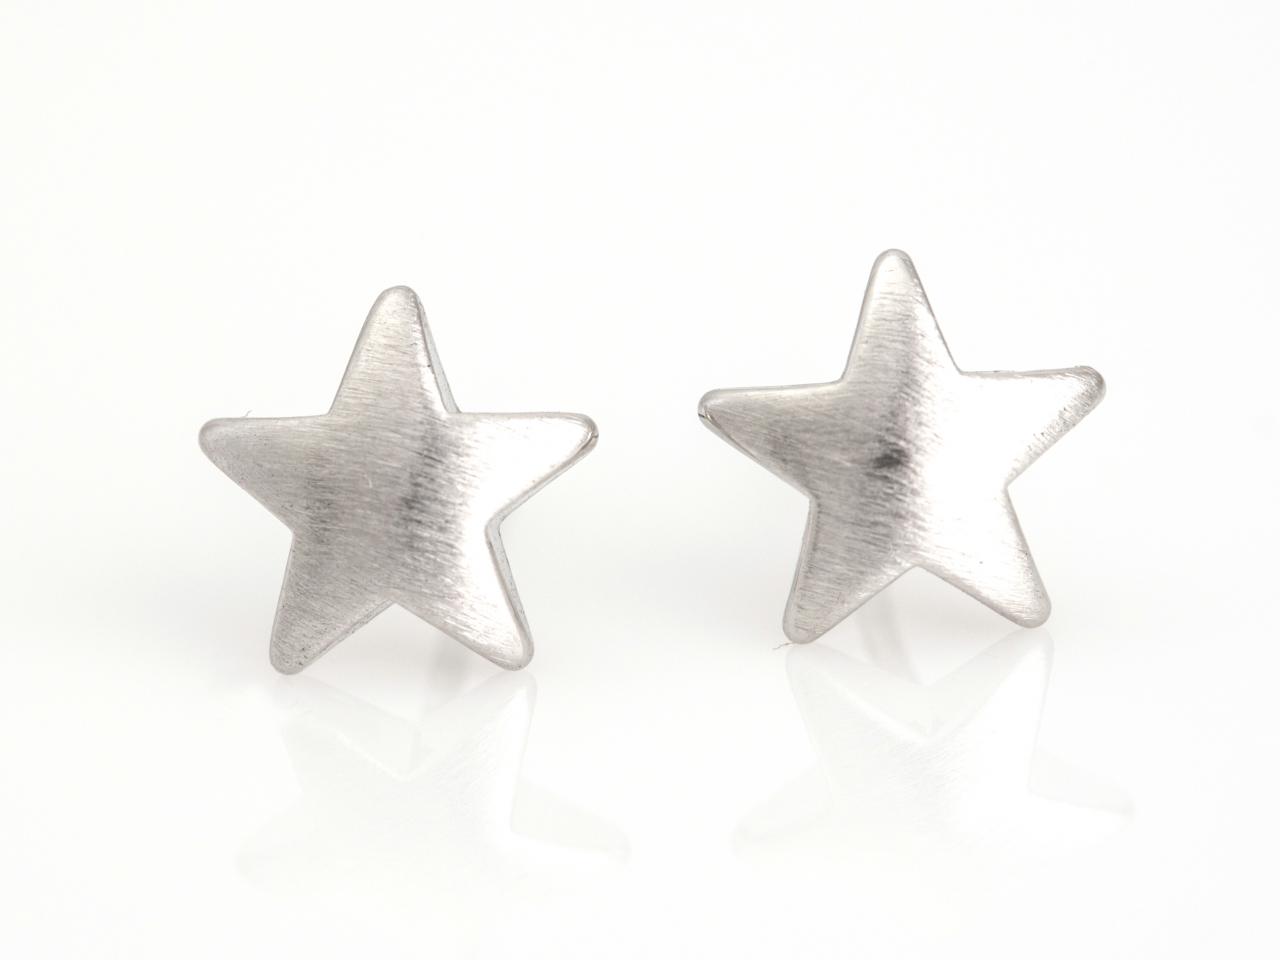 1 Star Earrings Delicate Scratch Star Stud Rhodium Plated Over Brass 5nbae10